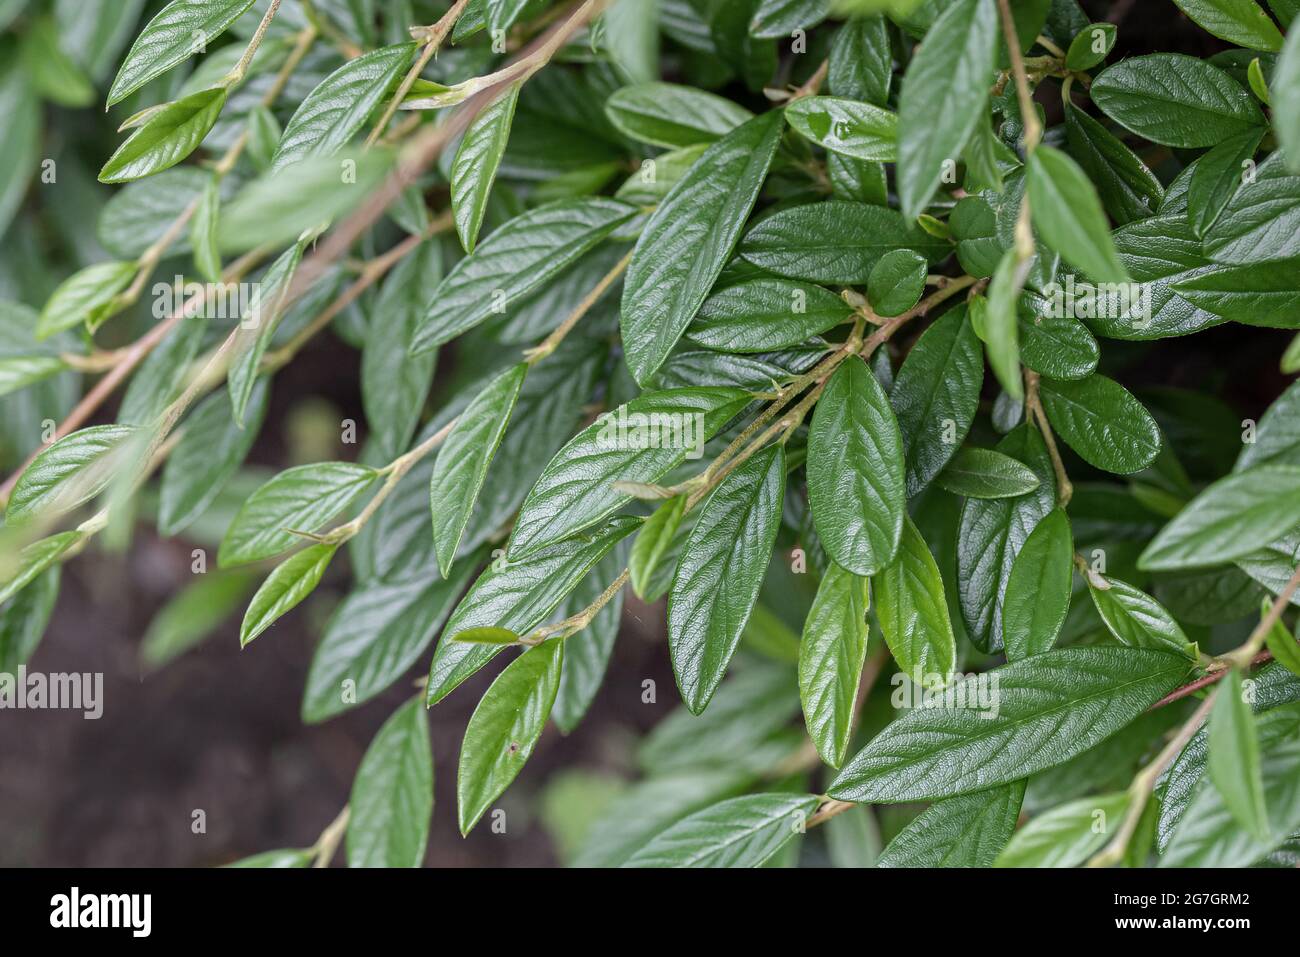 Willowleaf Cotoneaster (Cotoneaster salicifolius 'Parkteppich', Cotoneaster salicifolius Parkteppich), branches of cultivar Parkteppich, Germany Stock Photo